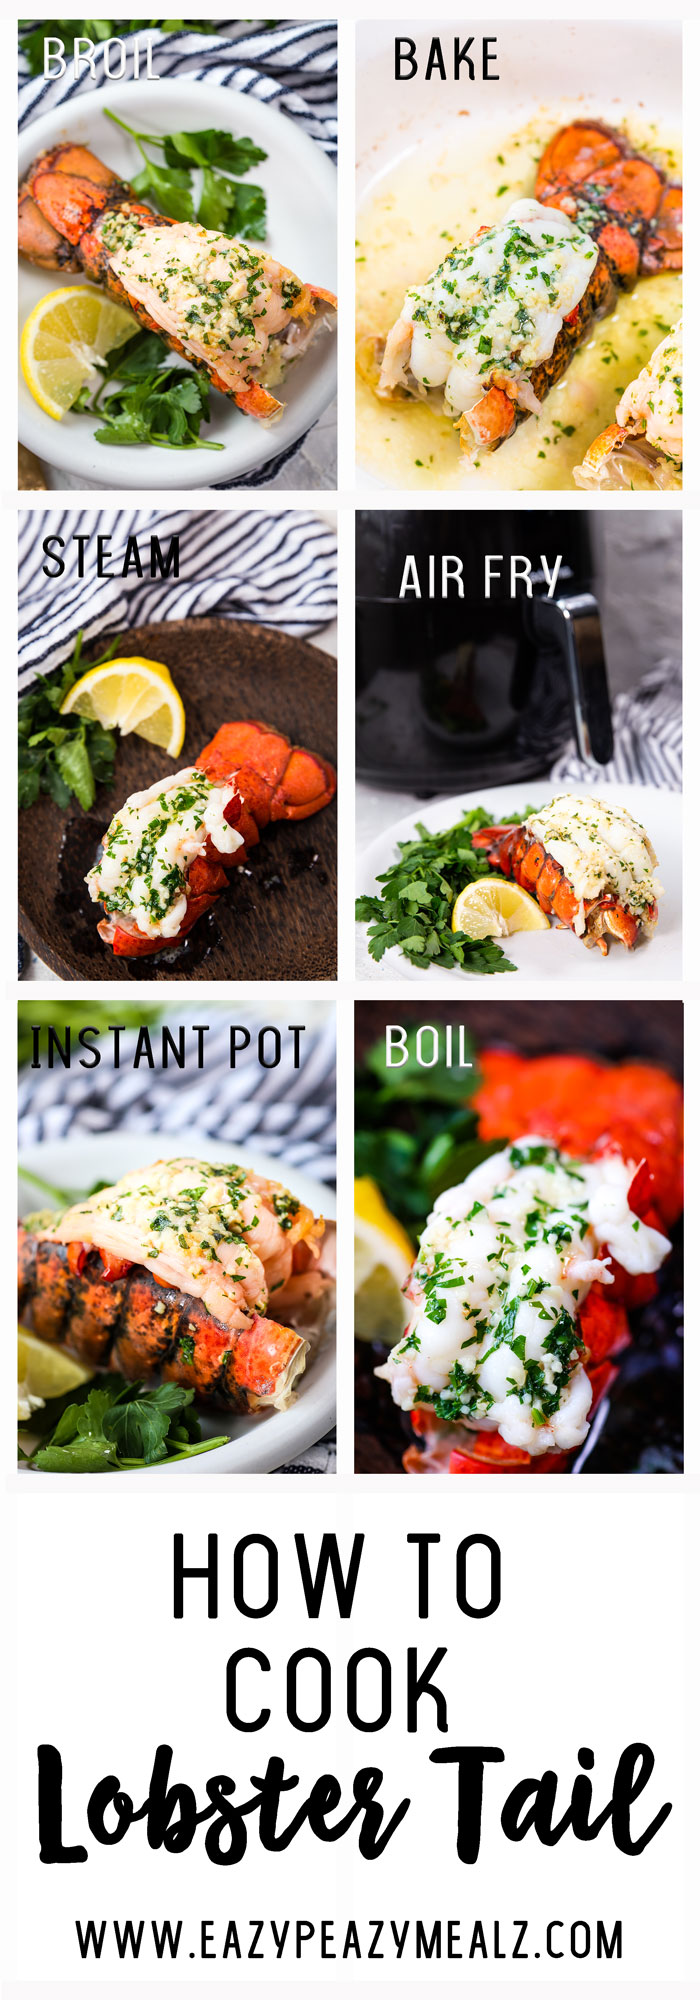 A complete breakdown of the different ways you can cook lobster tail at home, baking it, broiling it, air frying it, instant pot or pressure cooking it, steaming lobster and more.